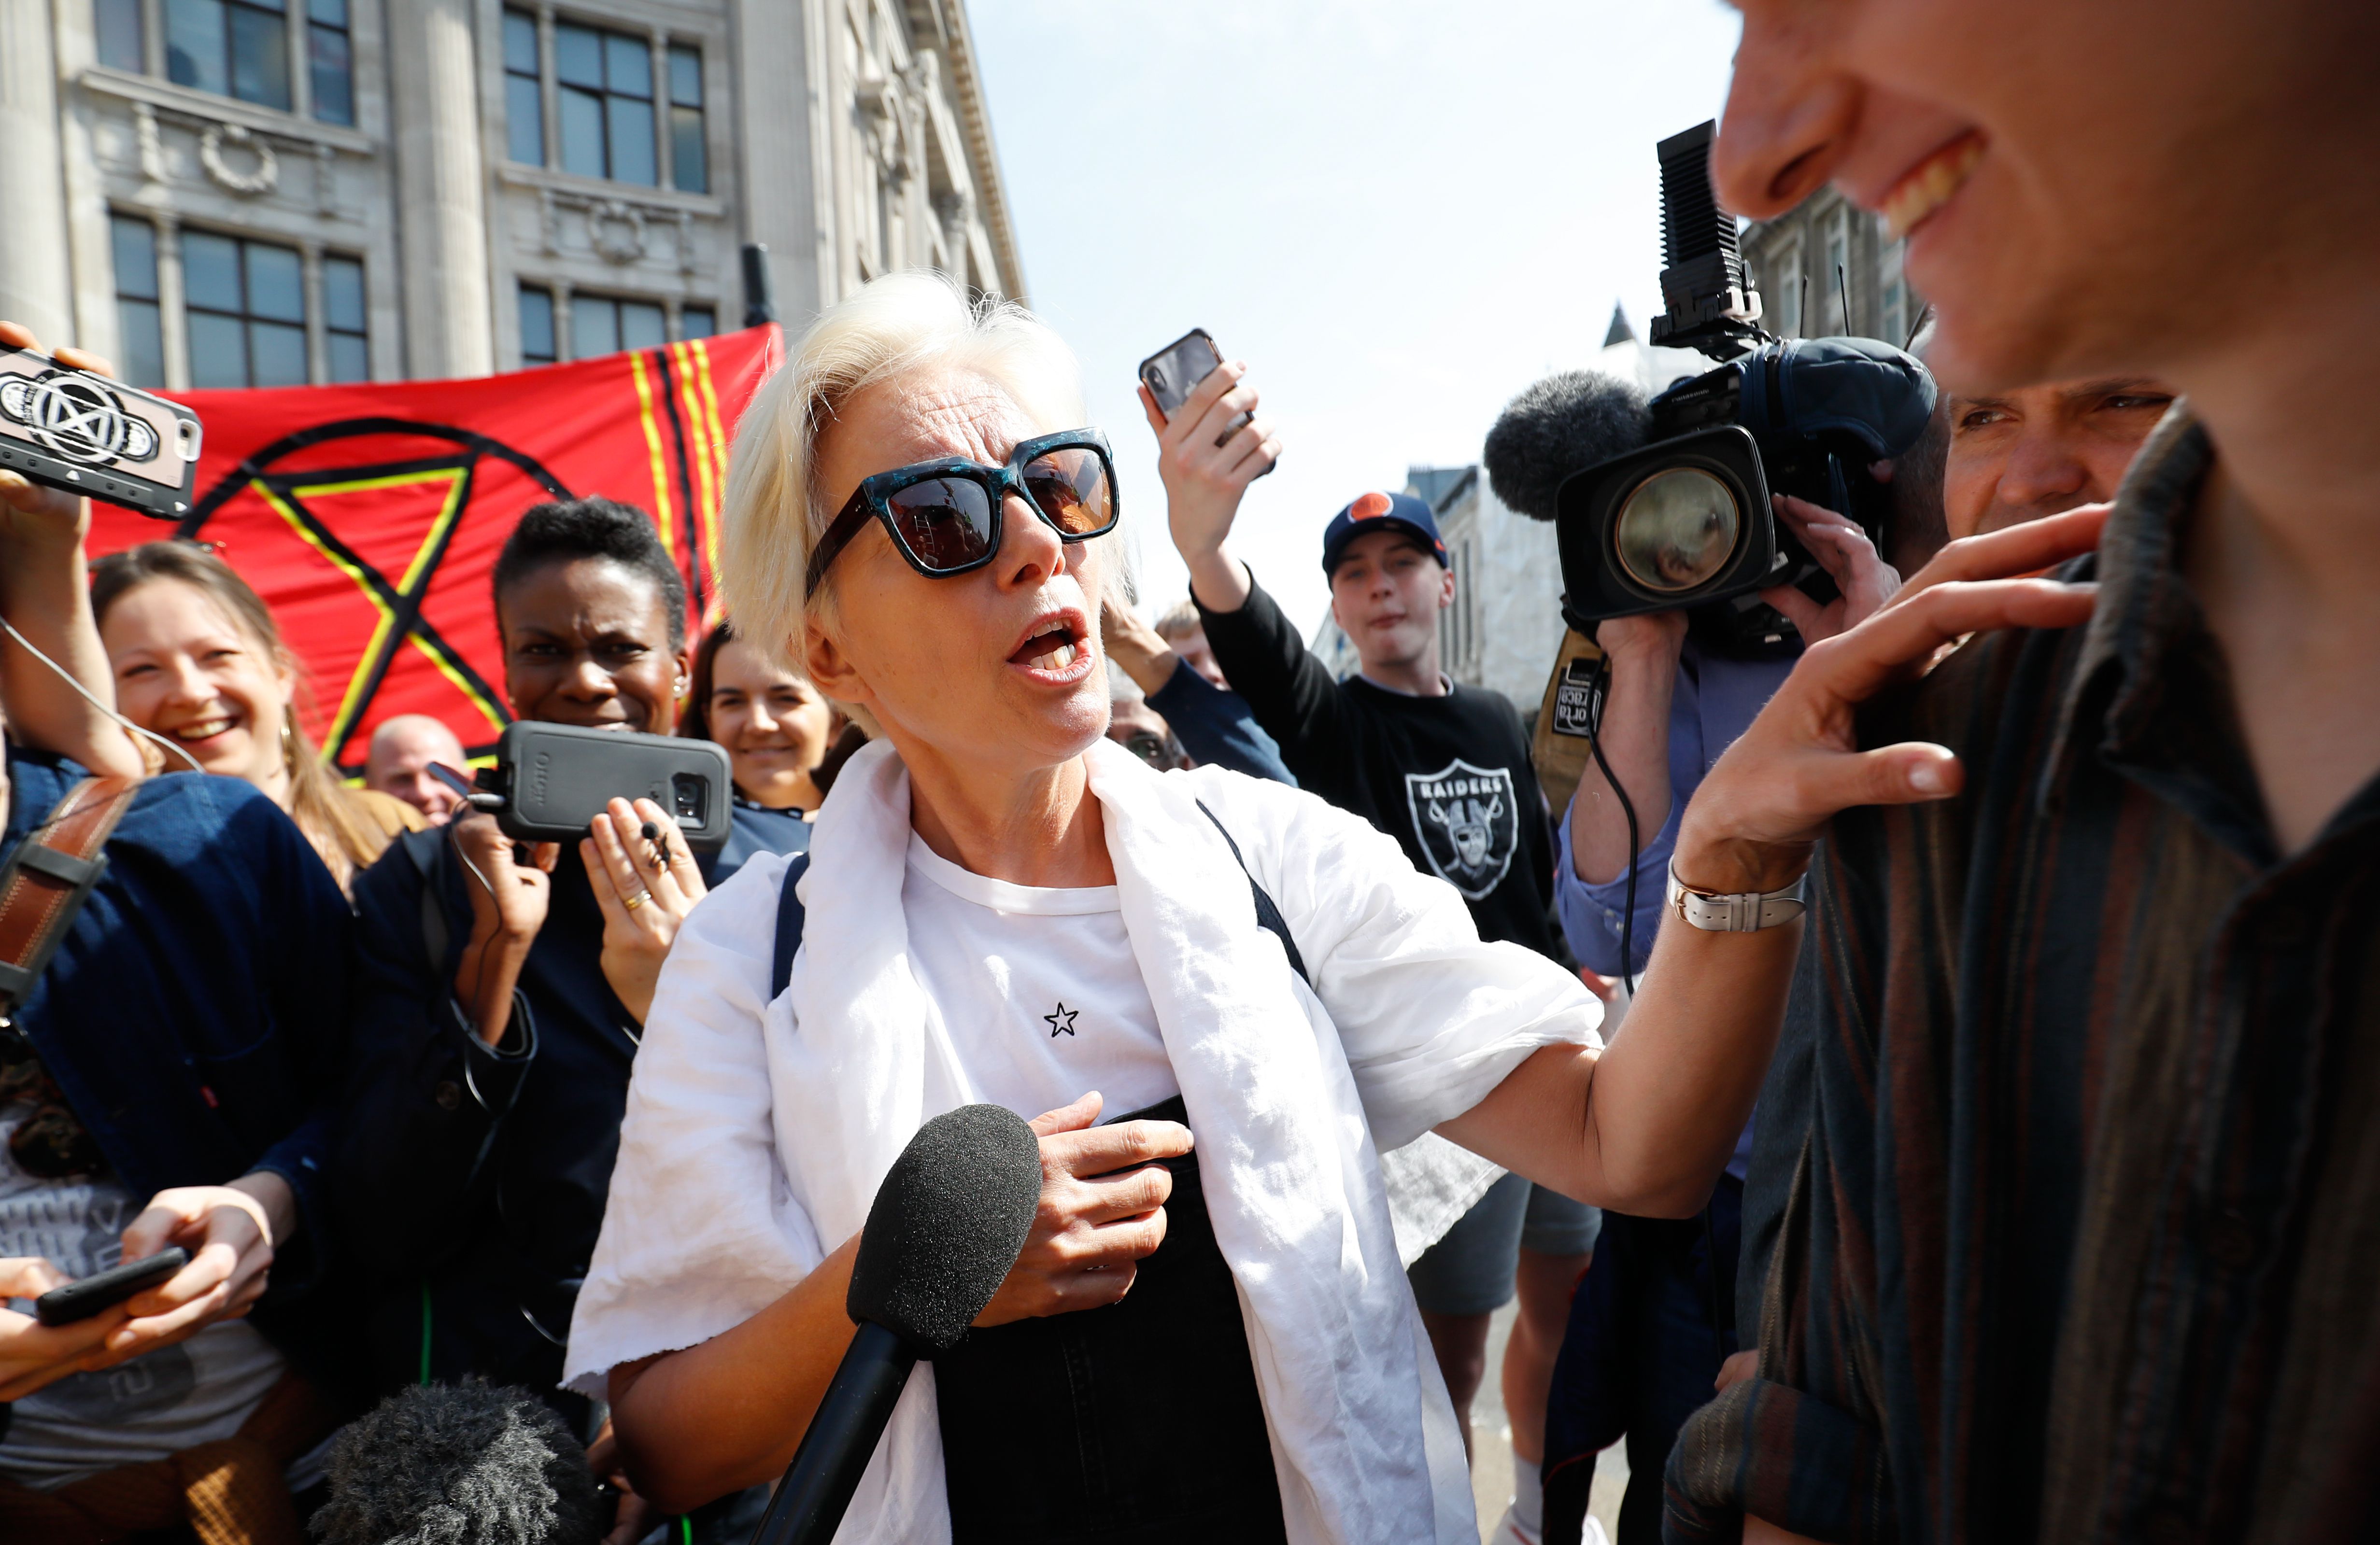 British actress Emma Thompson speaks to media as she joins climate change activists occupying the road junction at Oxford Circus in central London on April 19, 2019 during the fifth day of an environmental protest by the Extinction Rebellion group. - Undeterred by over 400 arrests, climate change activists continued their demonstration into a fifth day in London with a small protest at the country's main Heathrow Airport, along with the ongoing protest camps at other iconic locations around the British capital.  Demonstrators began blocking off a bridge and major central road junctions on April 15 at the start of a civil disobedience campaign calling for governments to declare an ecological emergency over climate change, to reduce greenhouse gas emissions to zero by 2025, halt biodiversity loss and be led by new "citizens' assemblies on climate and ecological justice". (Photo by Tolga AKMEN / AFP)        (Photo credit should read TOLGA AKMEN/AFP/Getty Images)